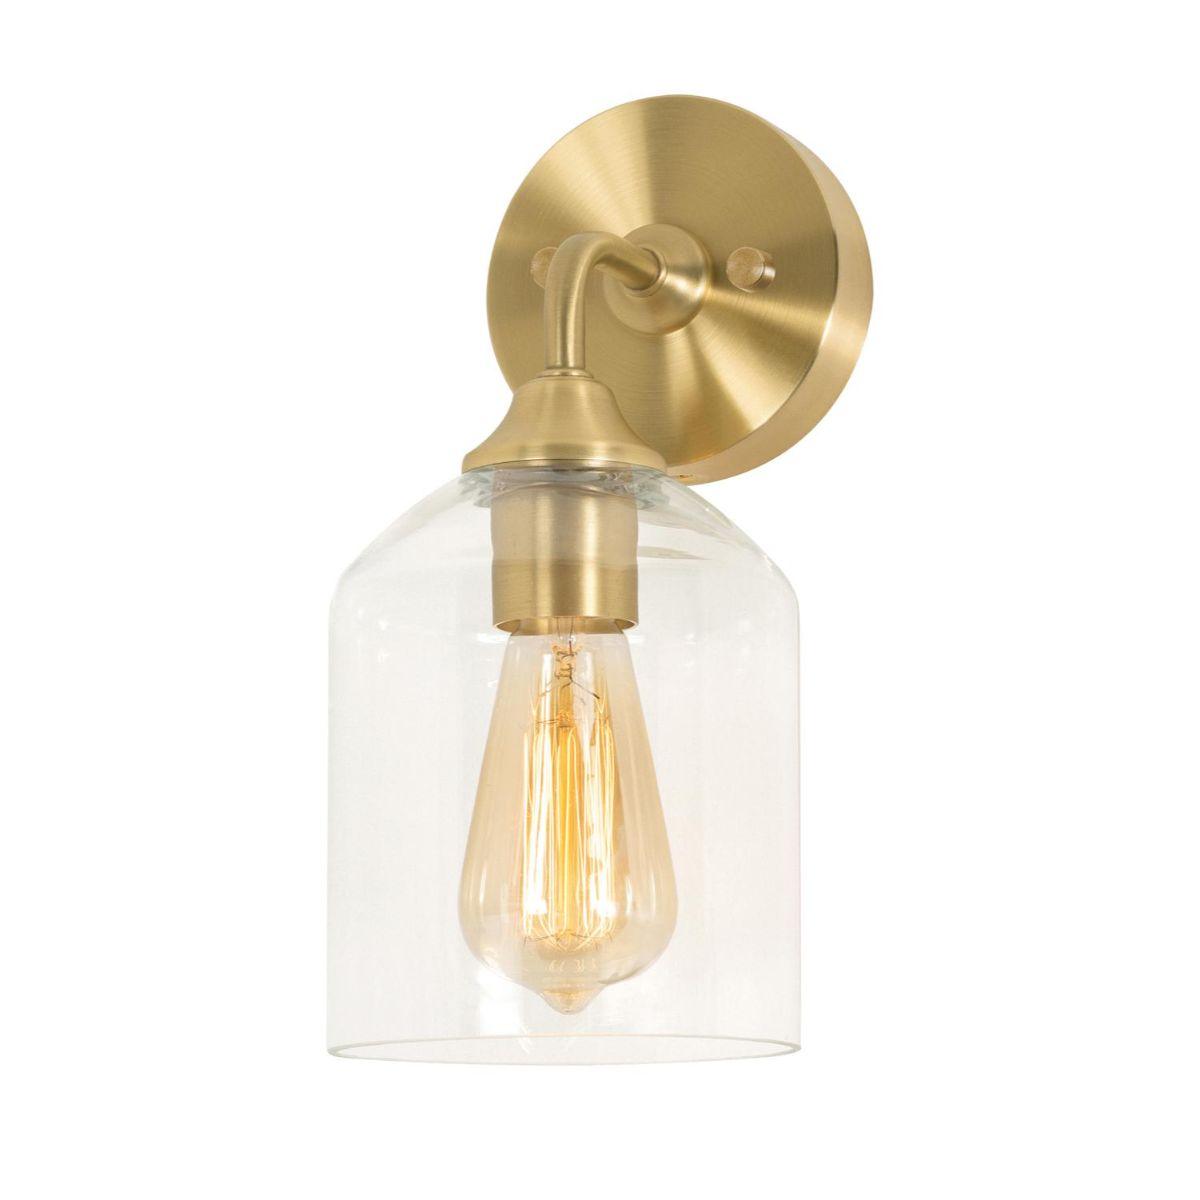 William 12 In. Armed Sconce